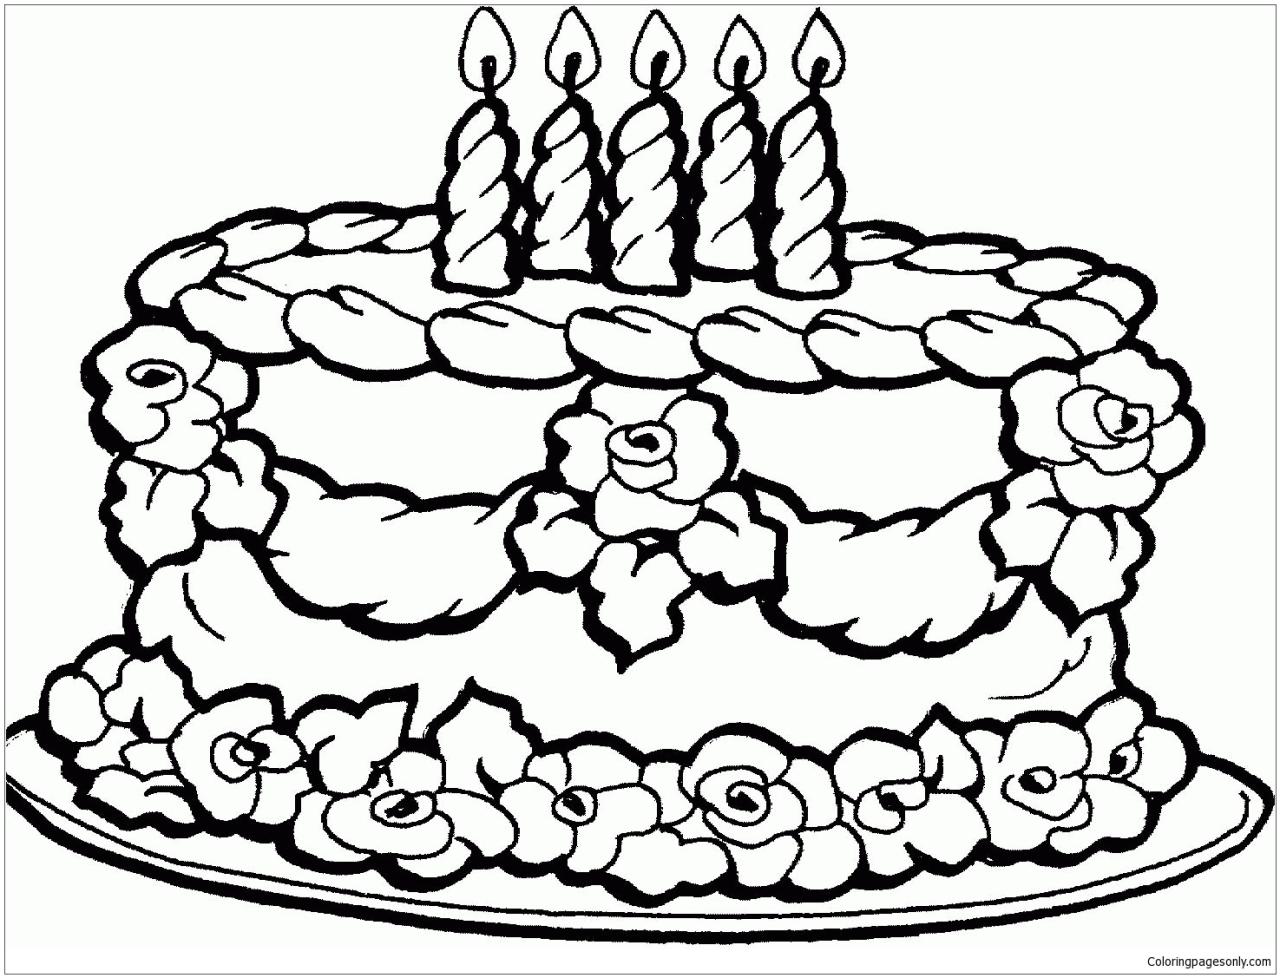 Birthday Cake 1 Coloring Pages Food Coloring Pages Coloring Pages